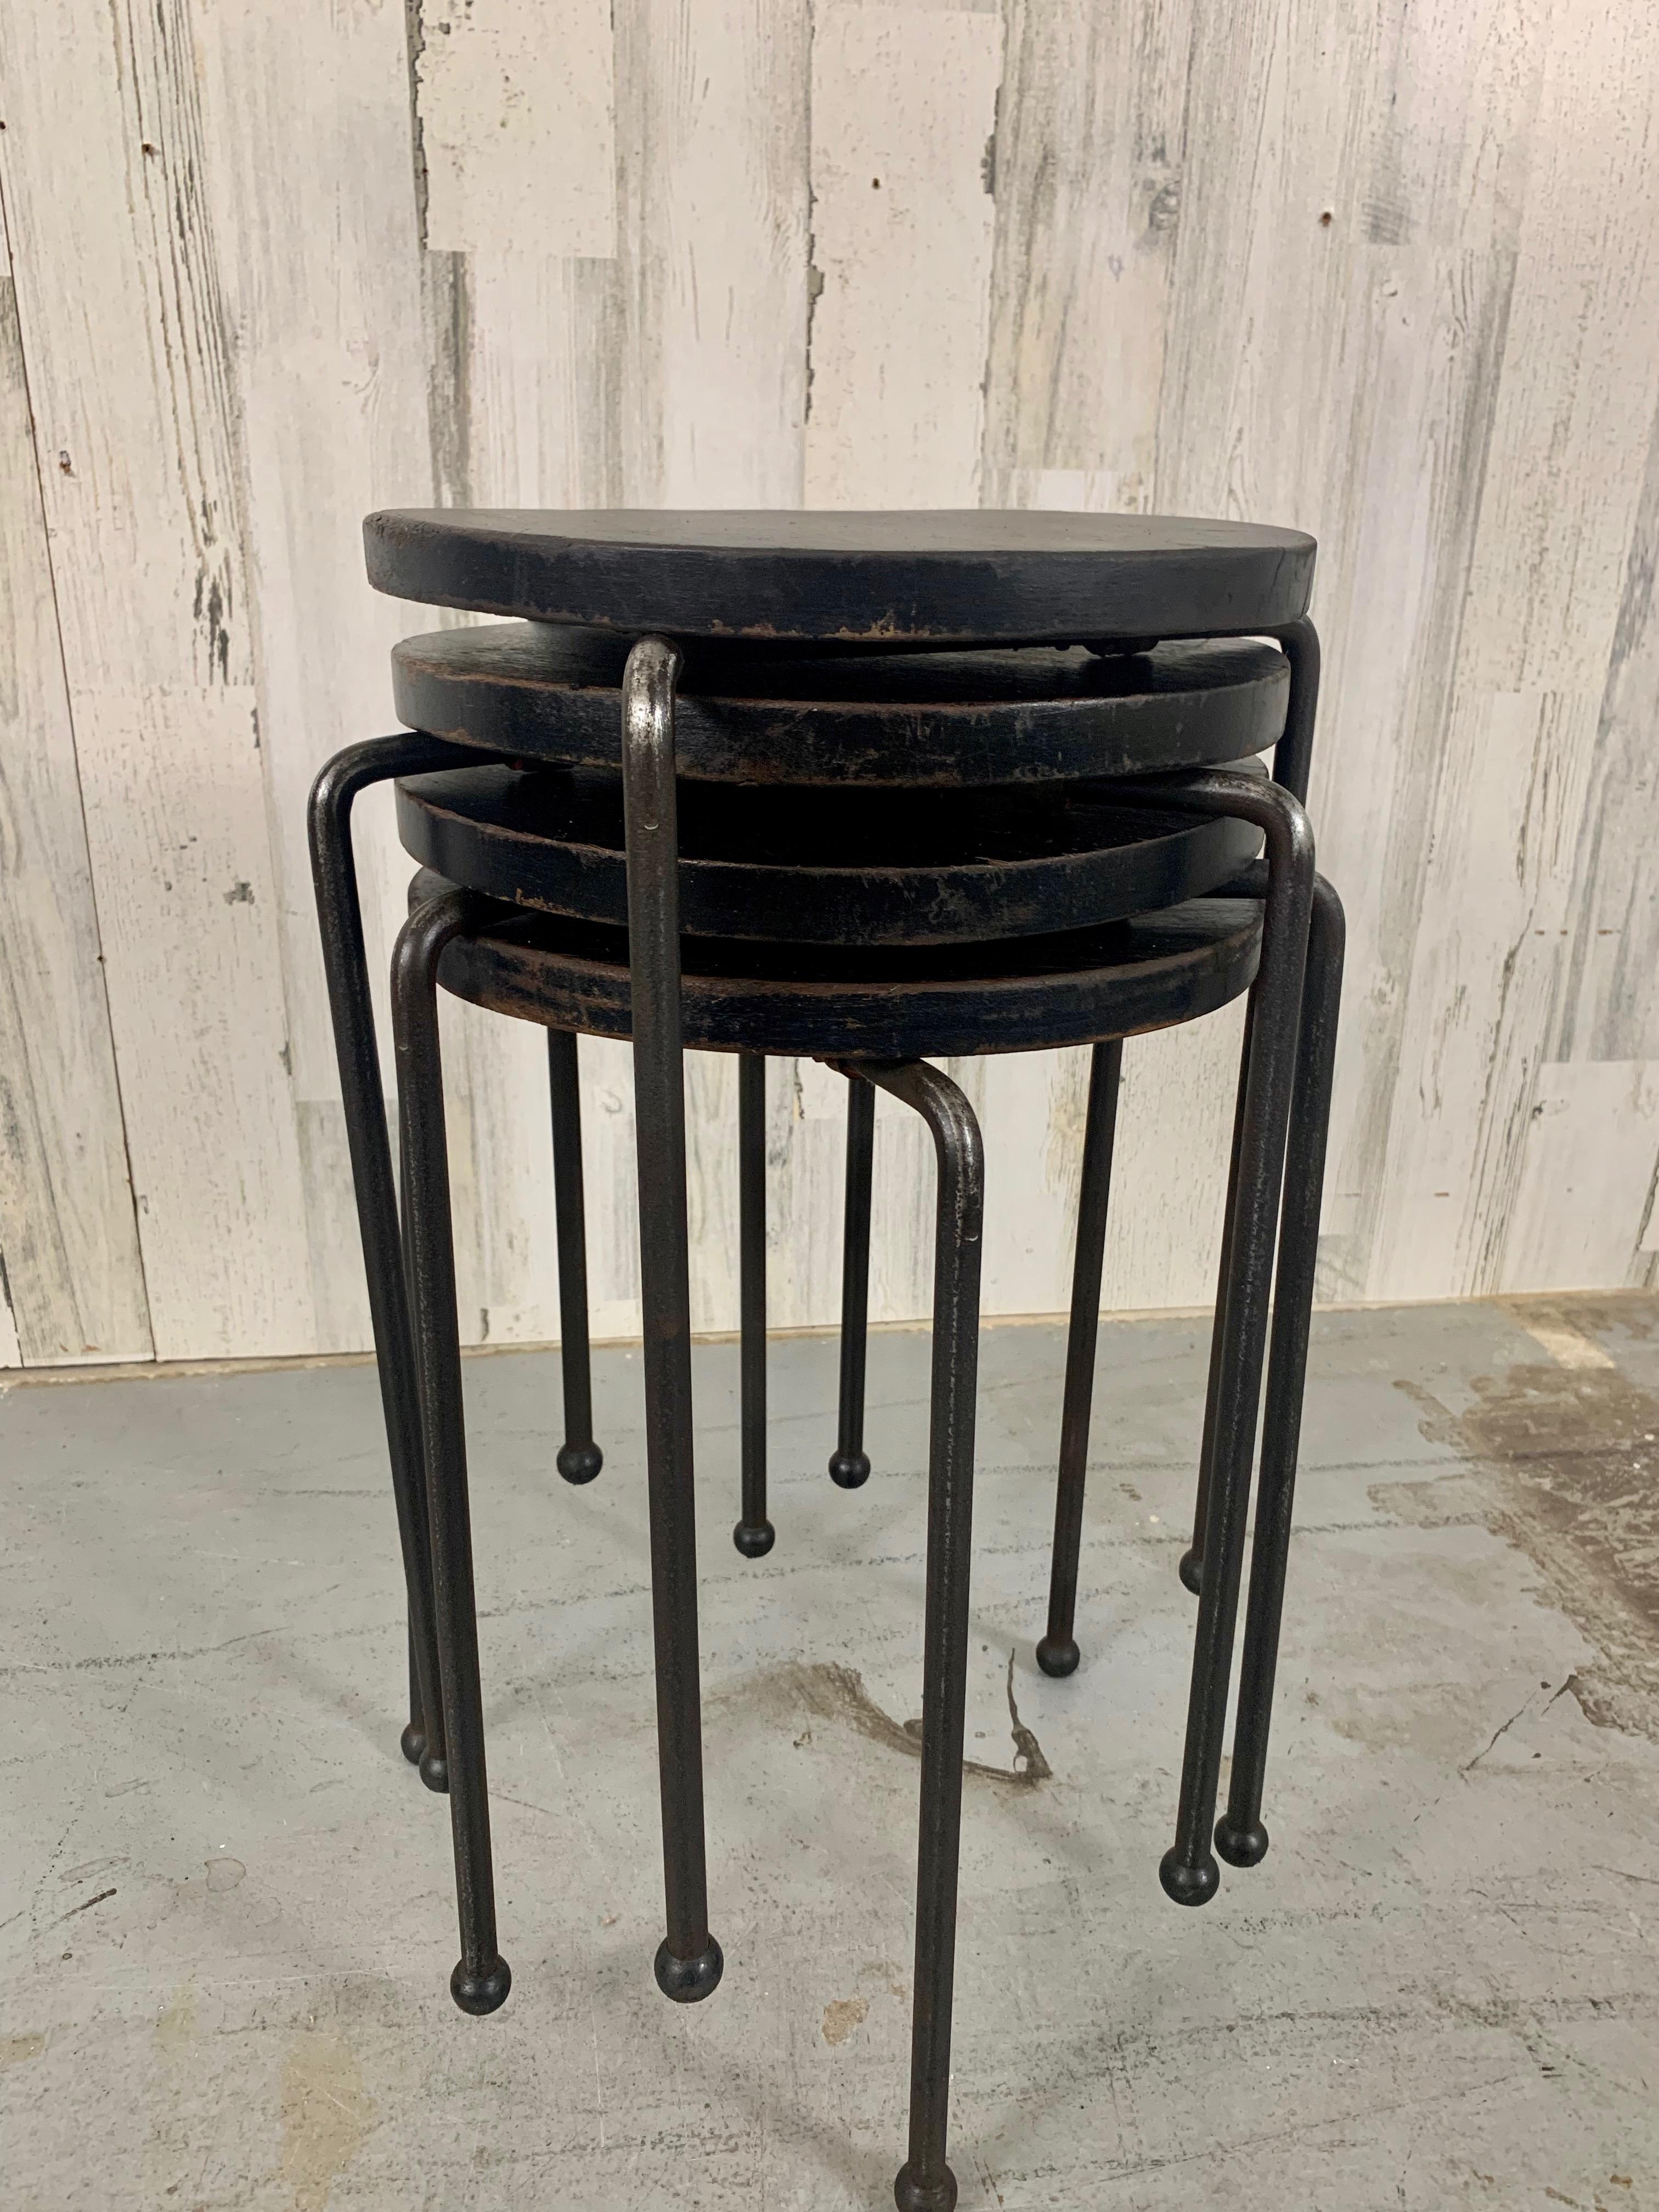 Wood and Iron Stacking Tables / stools  In Good Condition For Sale In Denton, TX